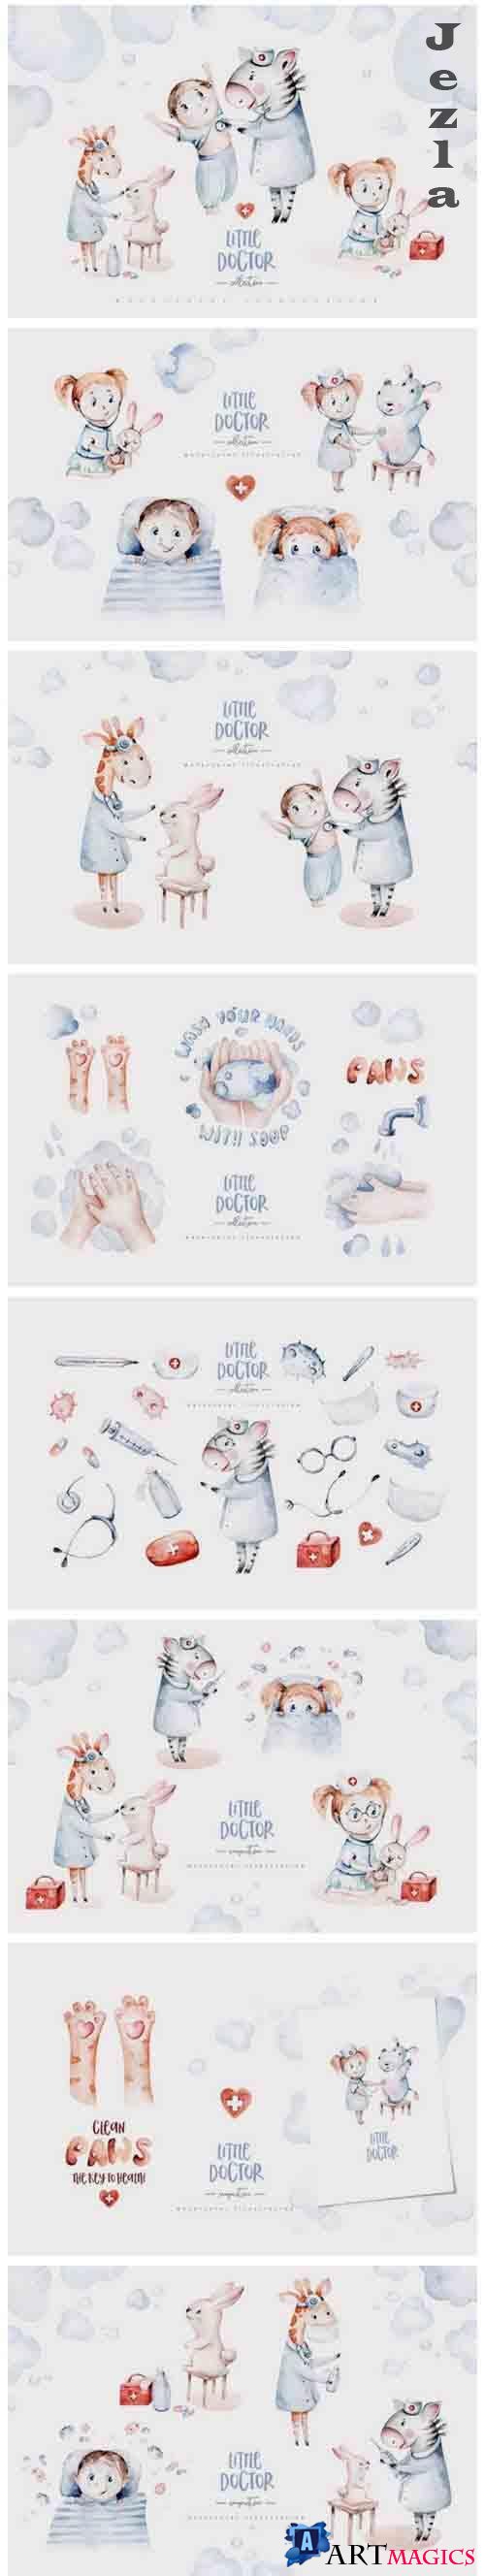 Little doctor cute collection - 4863164